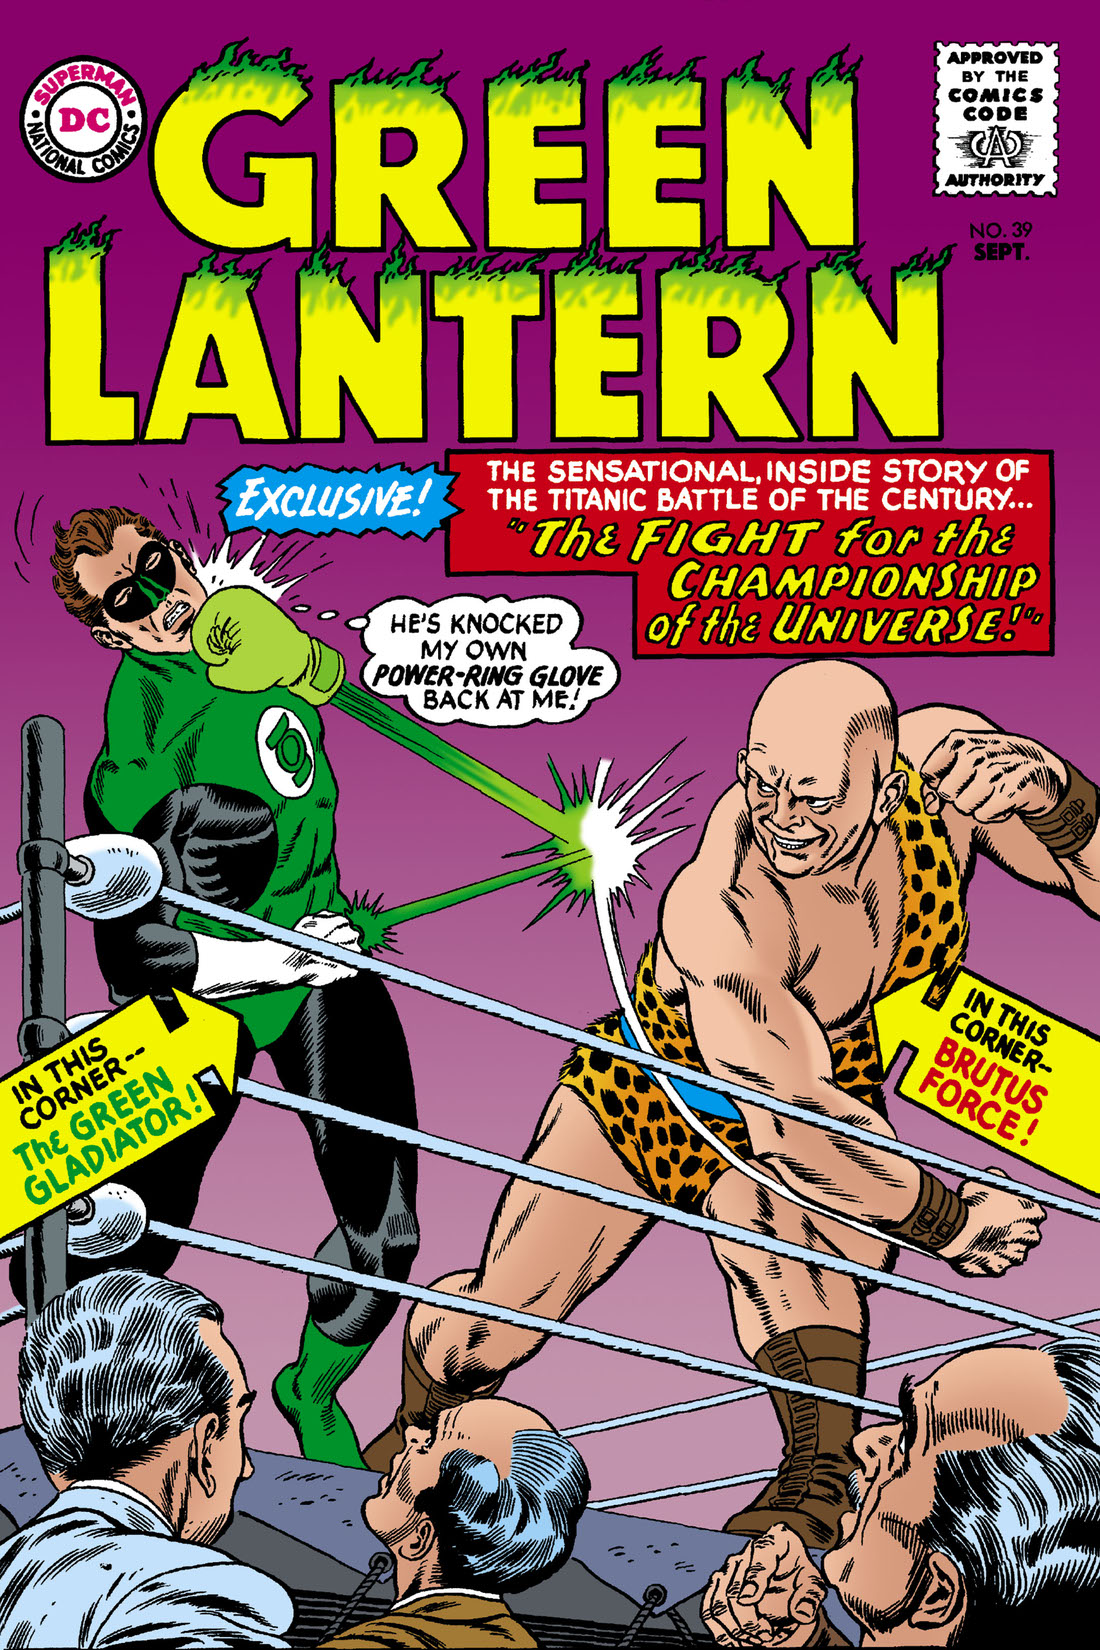 Green Lantern (1960-) #39 preview images